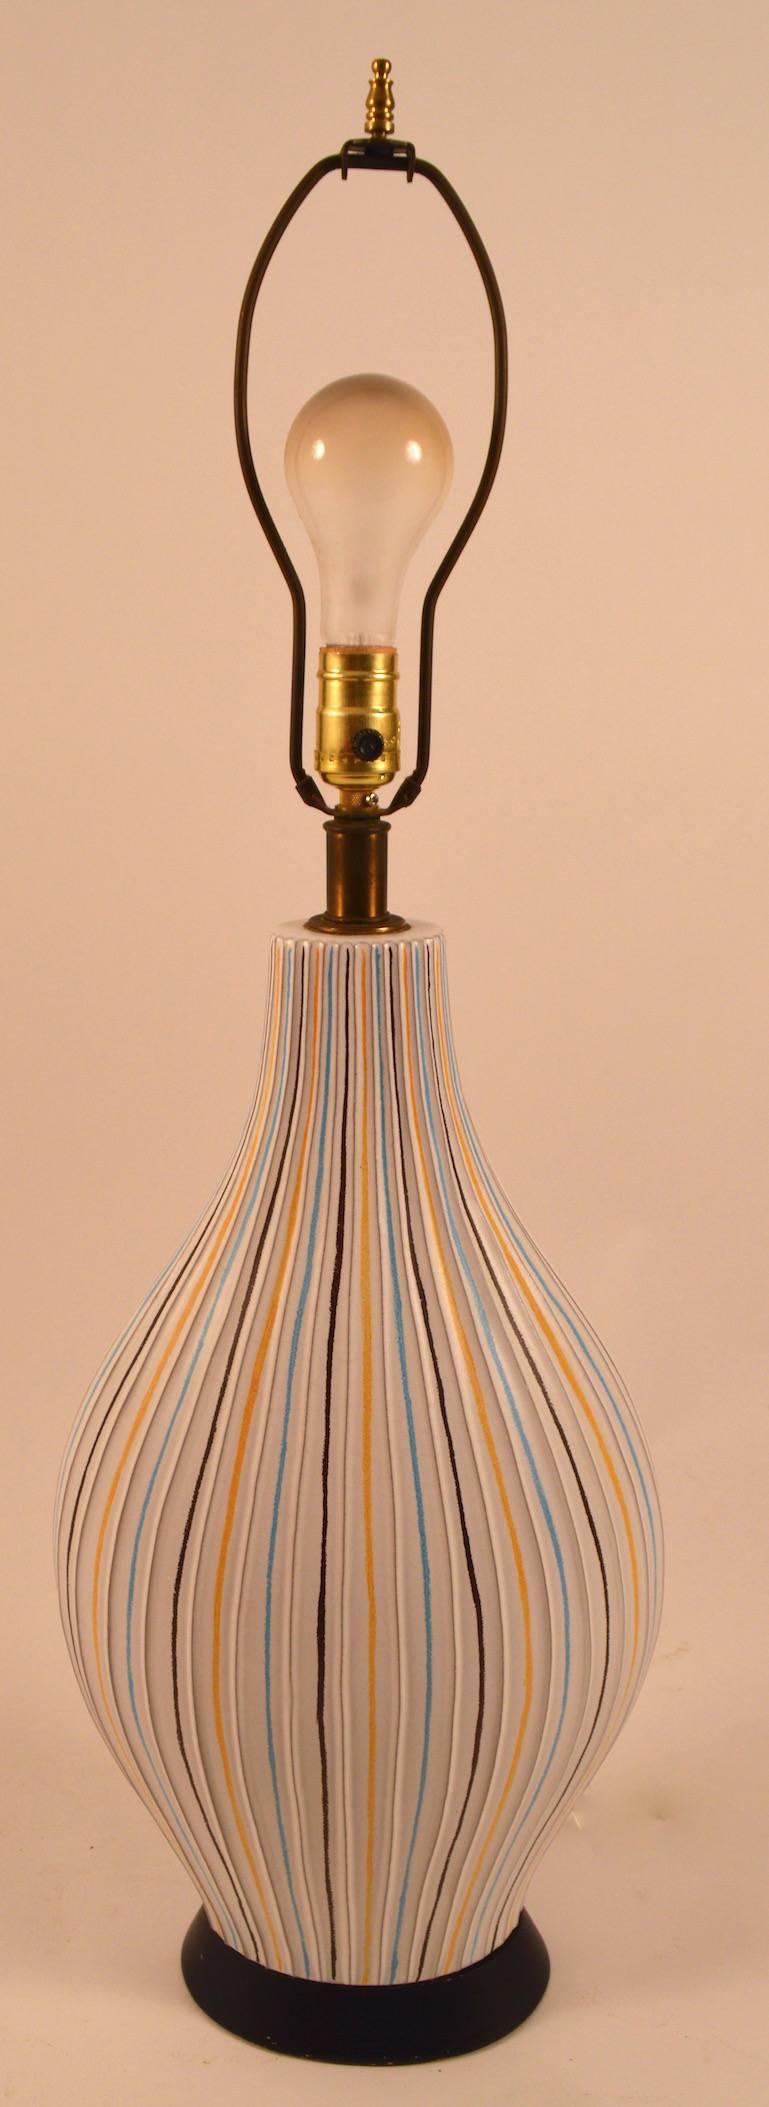 Mid-Century Modern Sgraffito Ceramic Pottery Lamp For Sale